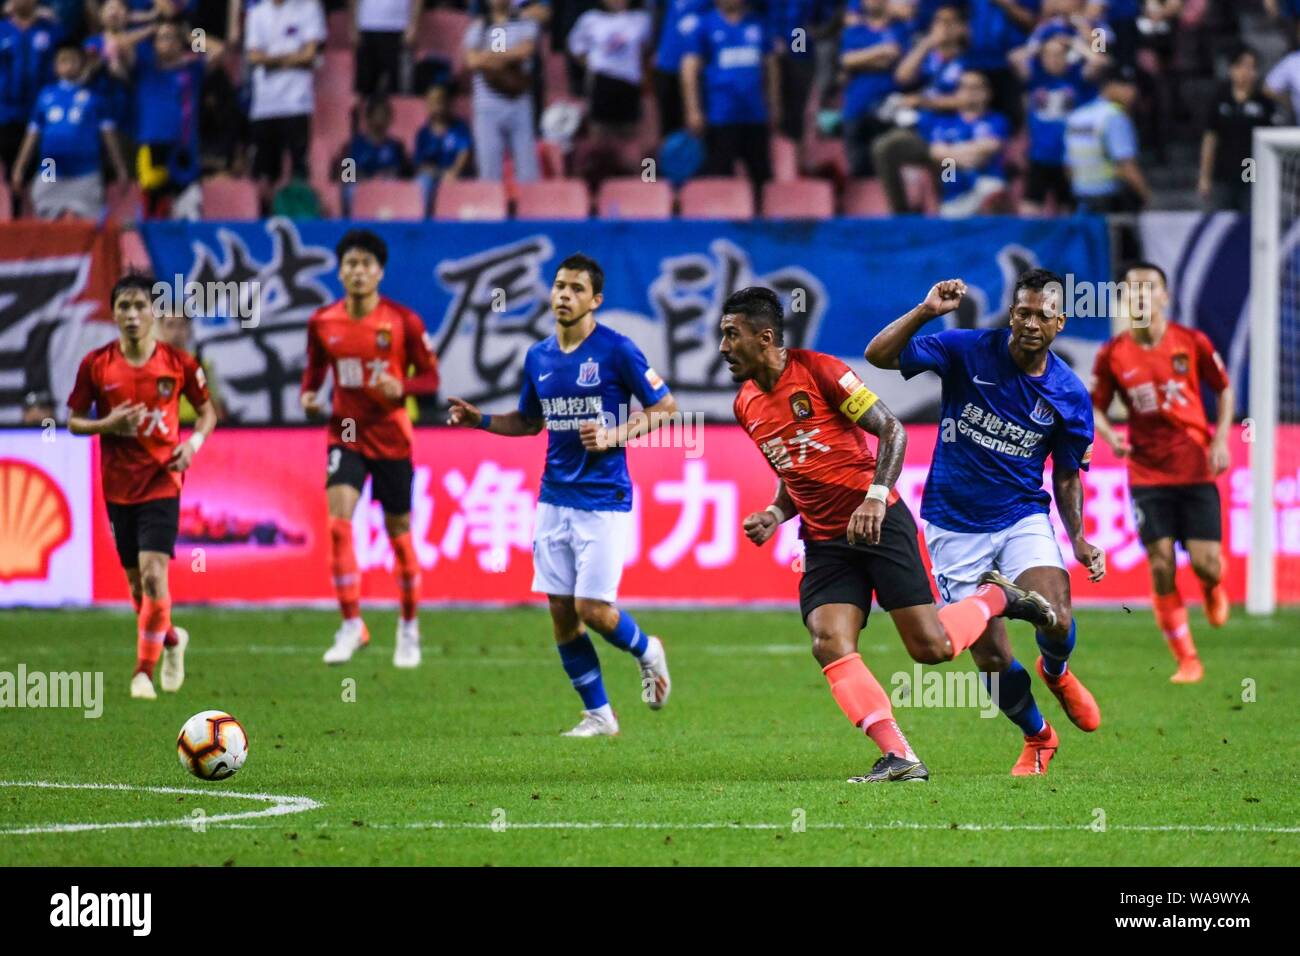 Brazilian football player Paulinho, center, of Guangzhou Evergrande Taobao passes the ball against Colombian football player Fredy Guarin of Shanghai Stock Photo